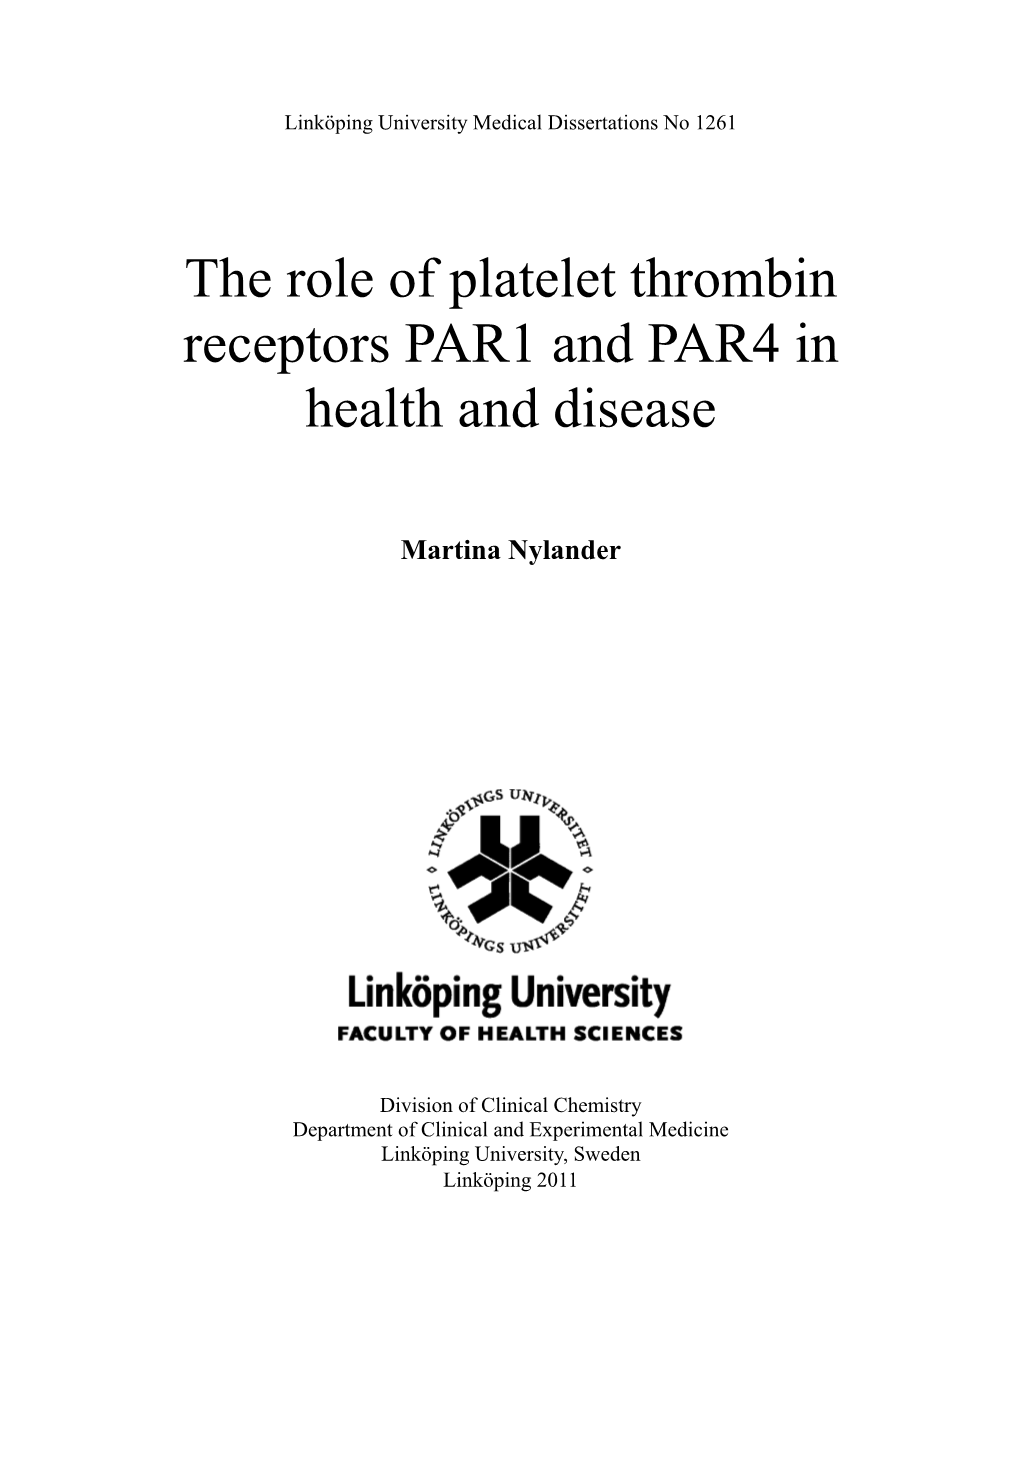 The Role of Platelet Thrombin Receptors PAR1 and PAR4 in Health and Disease